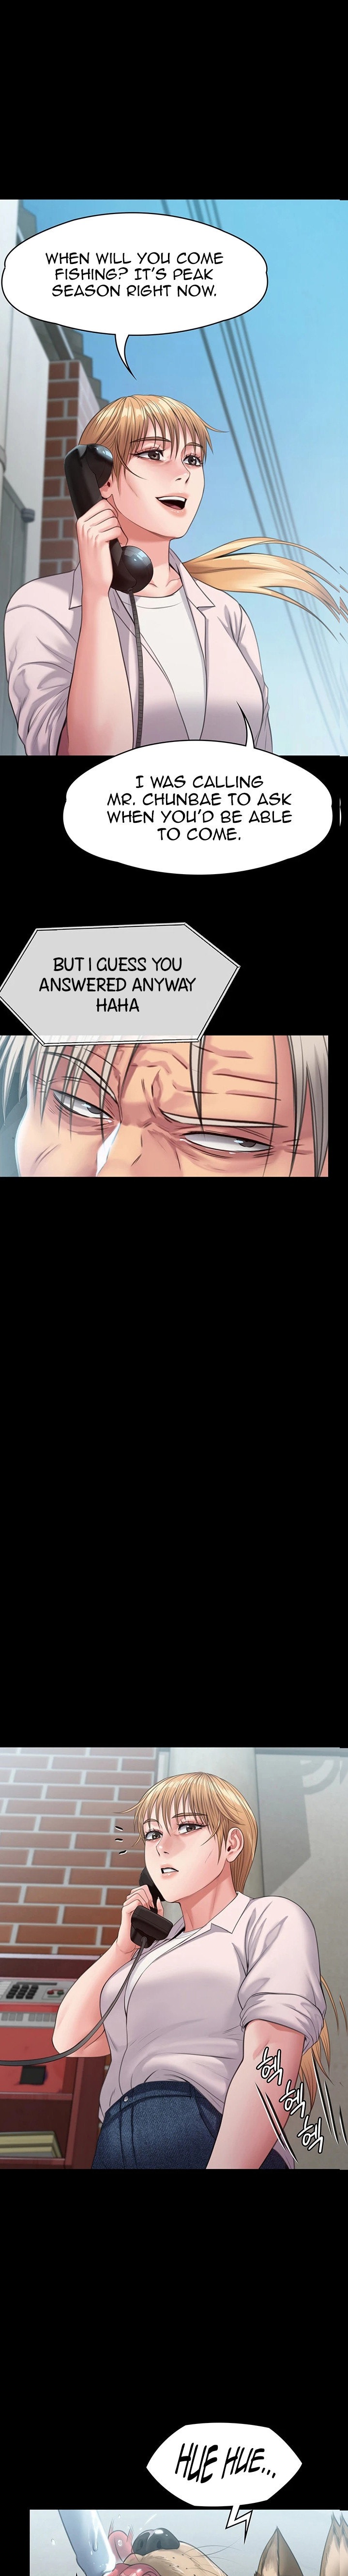 Panel Image 1 for chapter 249 of manhwa Queen Bee on read.oppai.stream